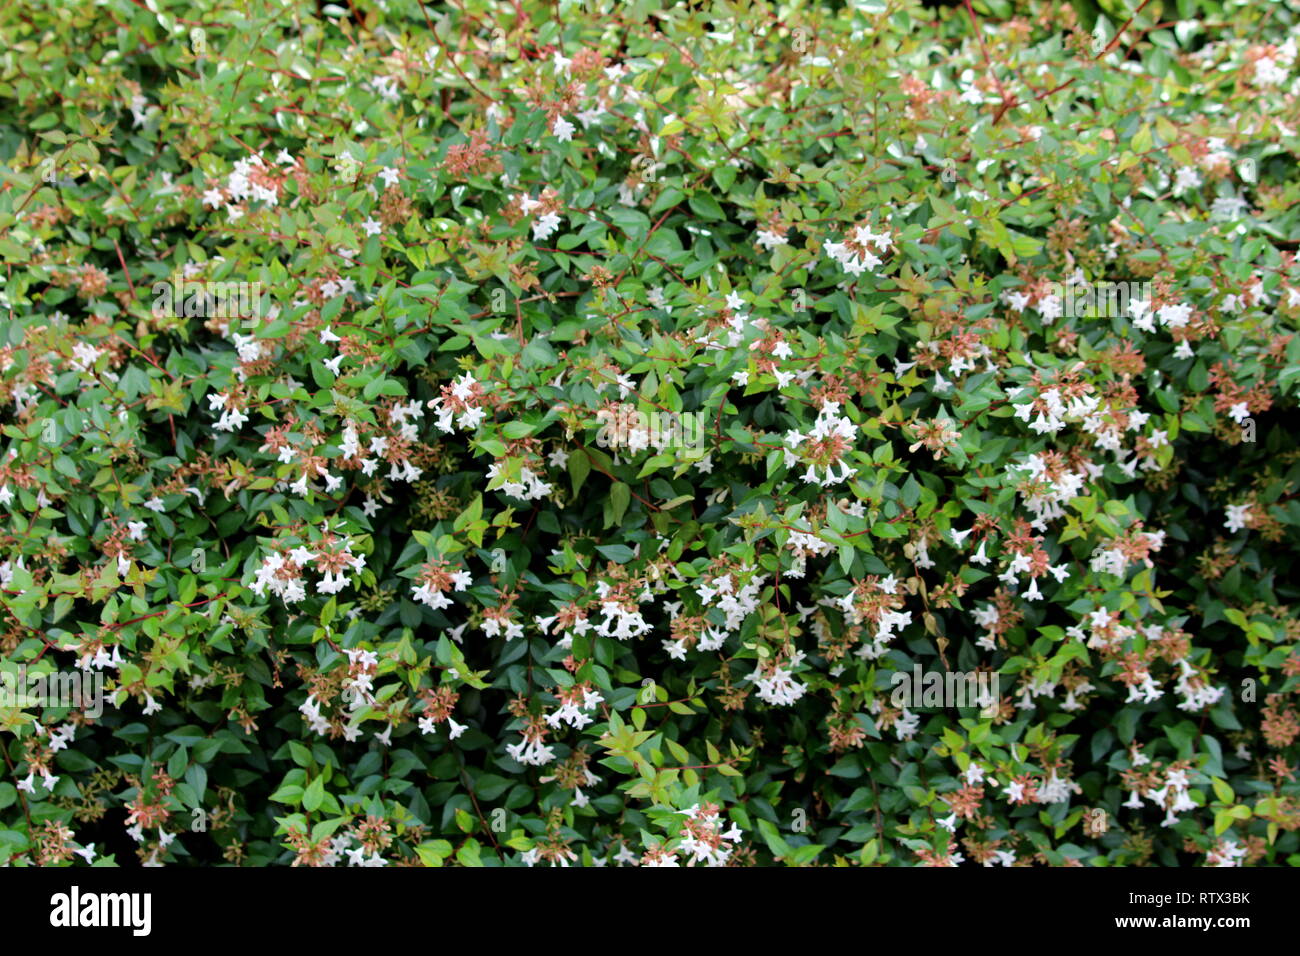 Linnaea grandiflora or Abelia grandiflora or Glossy Abelia dense semi evergreen shrub with arching branches densely covered with small glossy oval Stock Photo